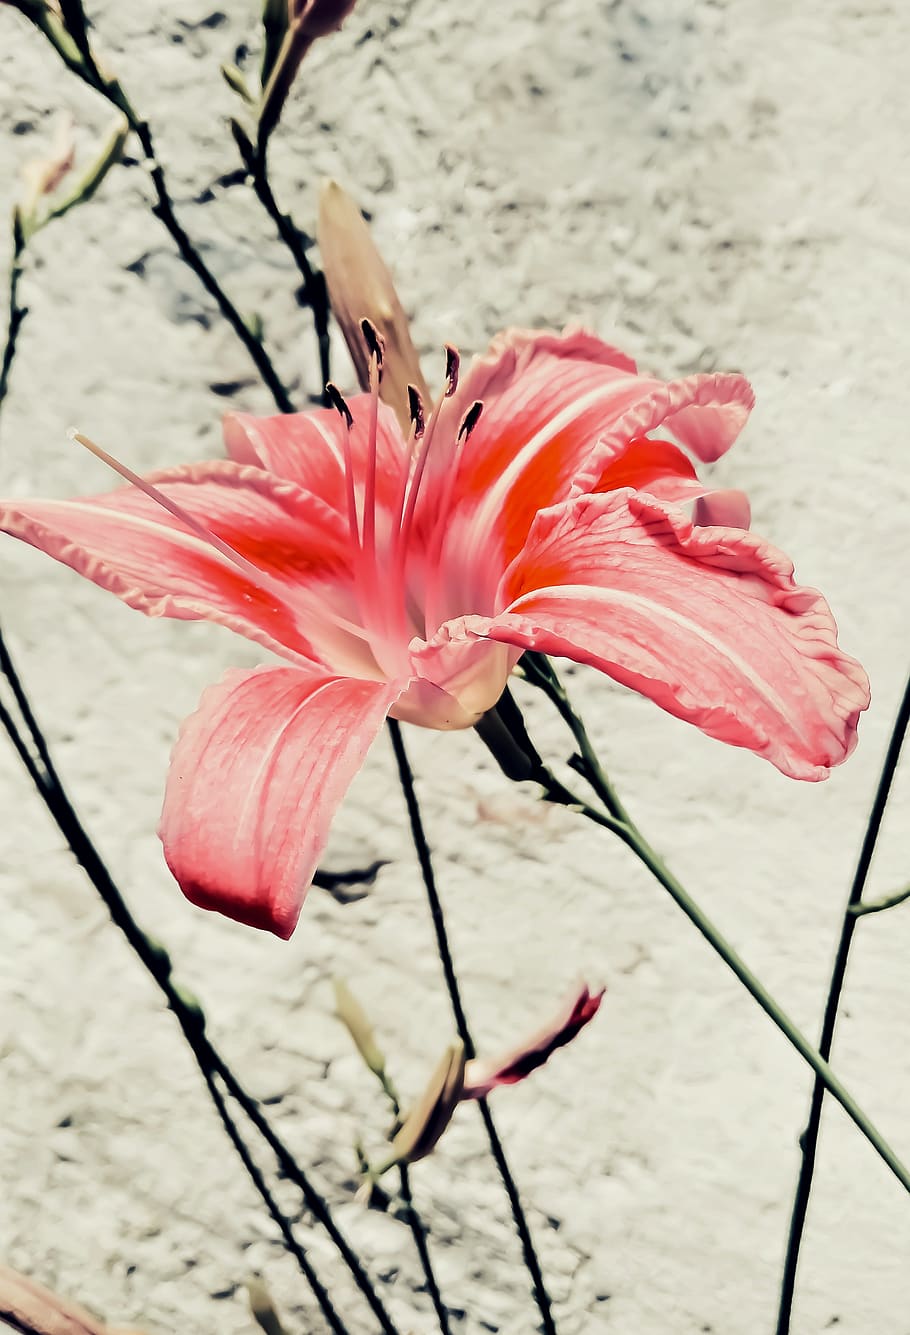 lily, flower, nature, harmony, beautiful, mottled light red